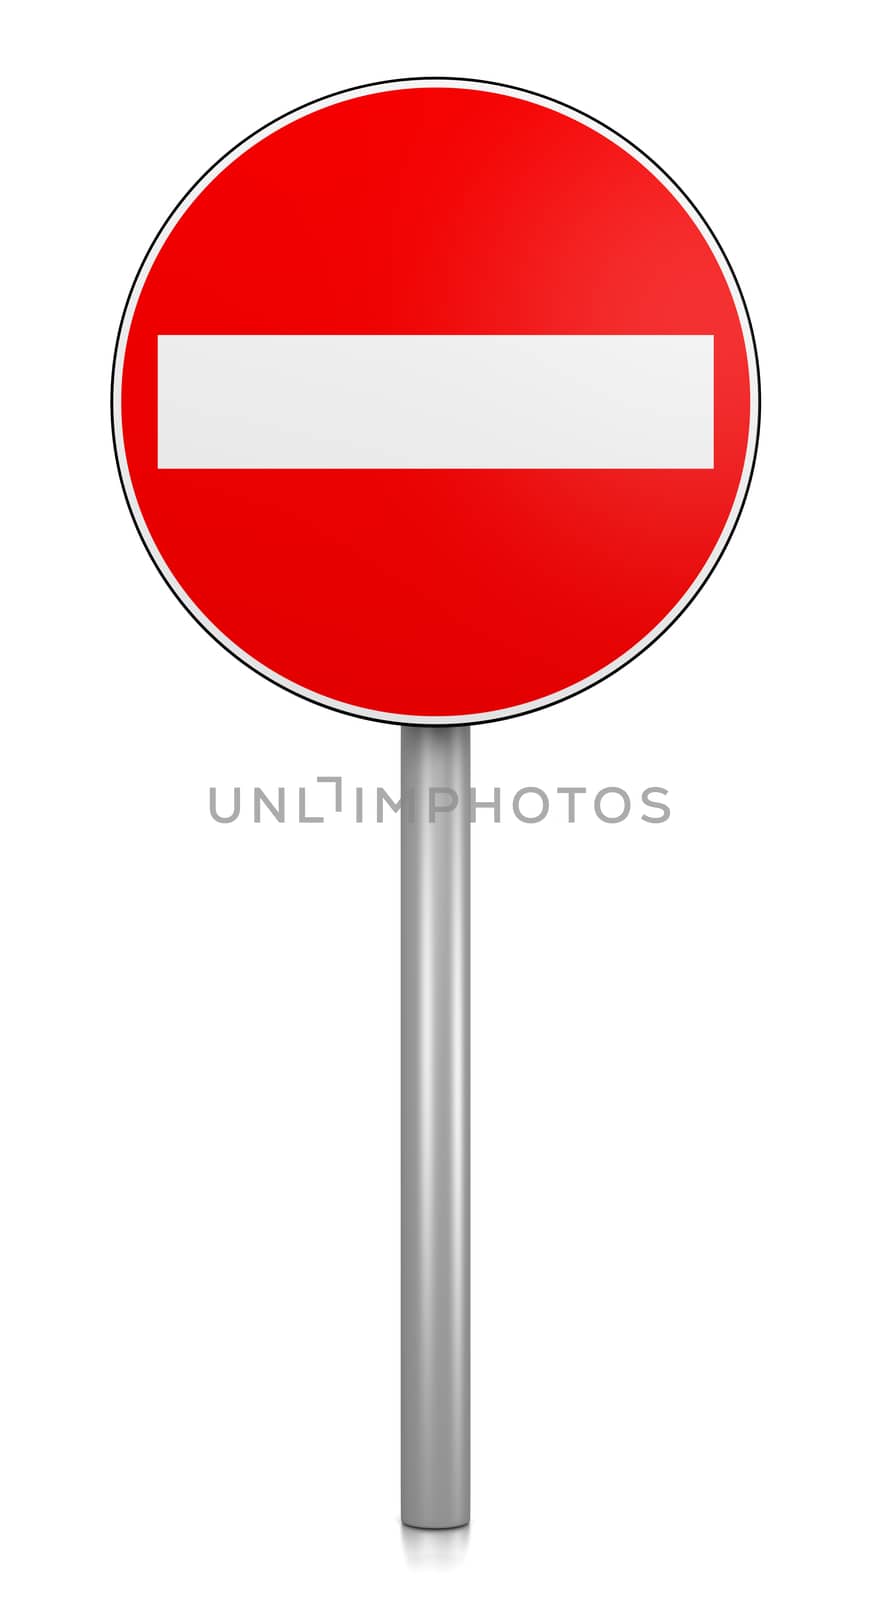 Access Denied Road Sign on White Background 3D Illustration